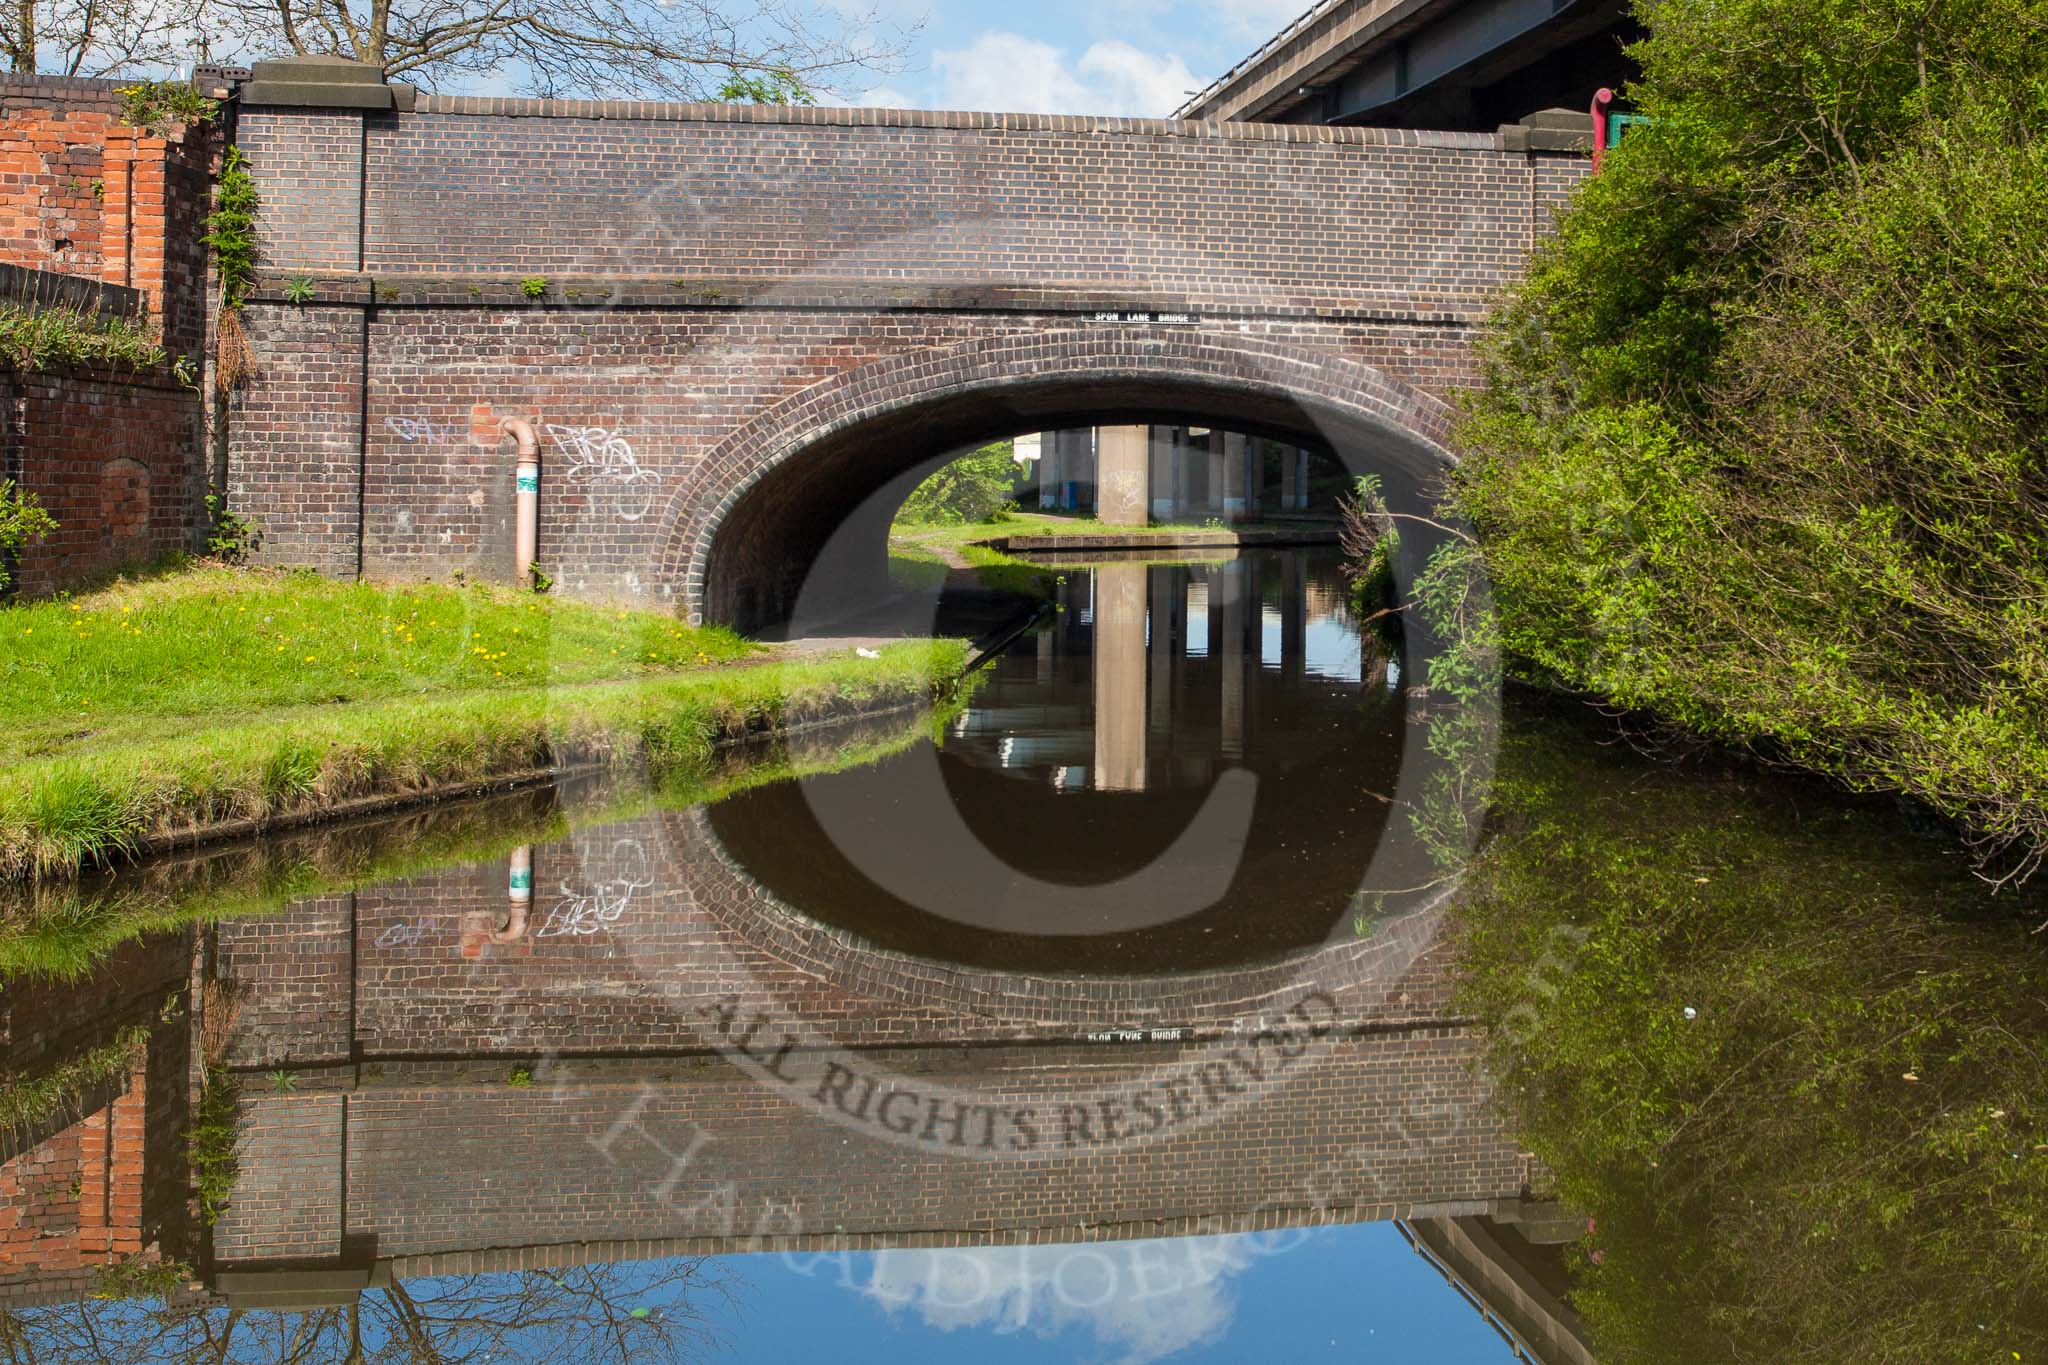 BCN Marathon Challenge 2013: Spon Land Bridge on the BCN Old Main Line between Summit Tunnel and Spon Lane Junction, with the M5 motoway folowing the canal..
Birmingham Canal Navigation,


United Kingdom,
on 25 May 2013 at 09:45, image #120